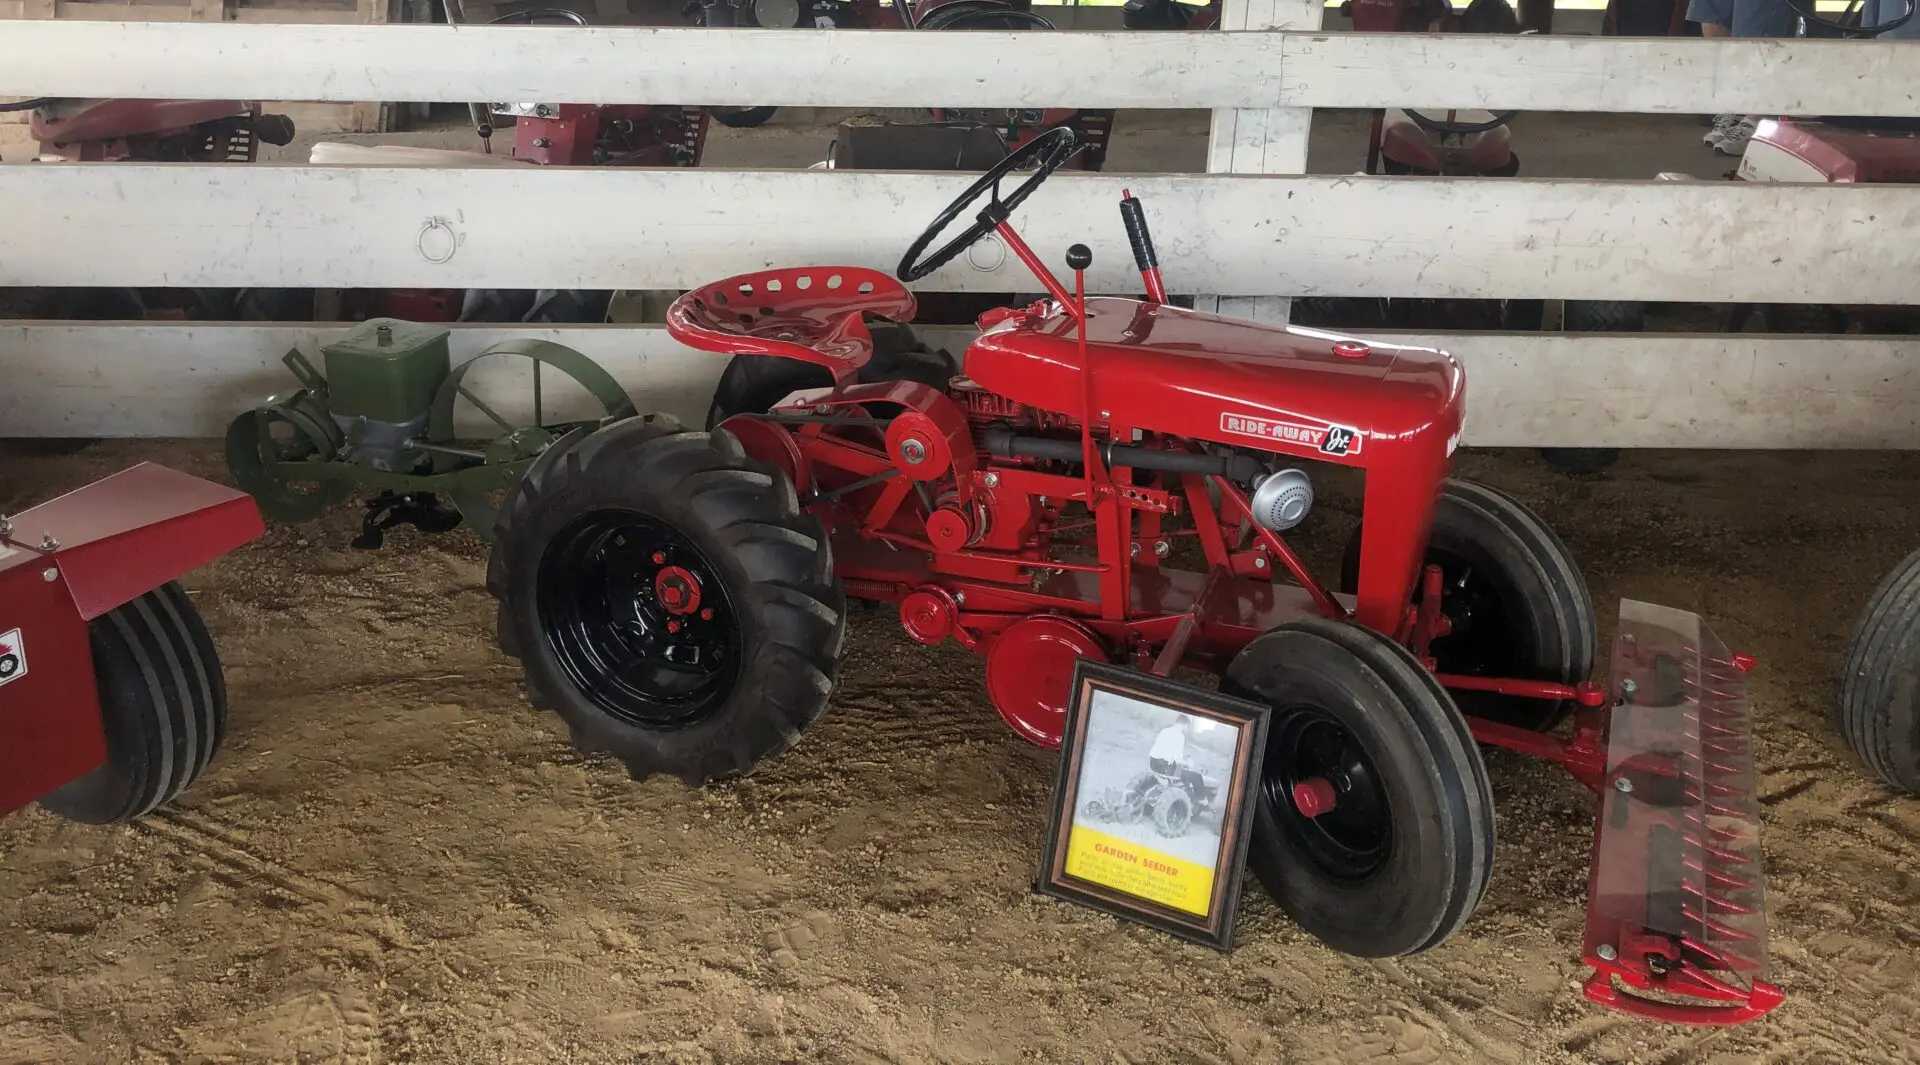 A red tractor is parked in the dirt.